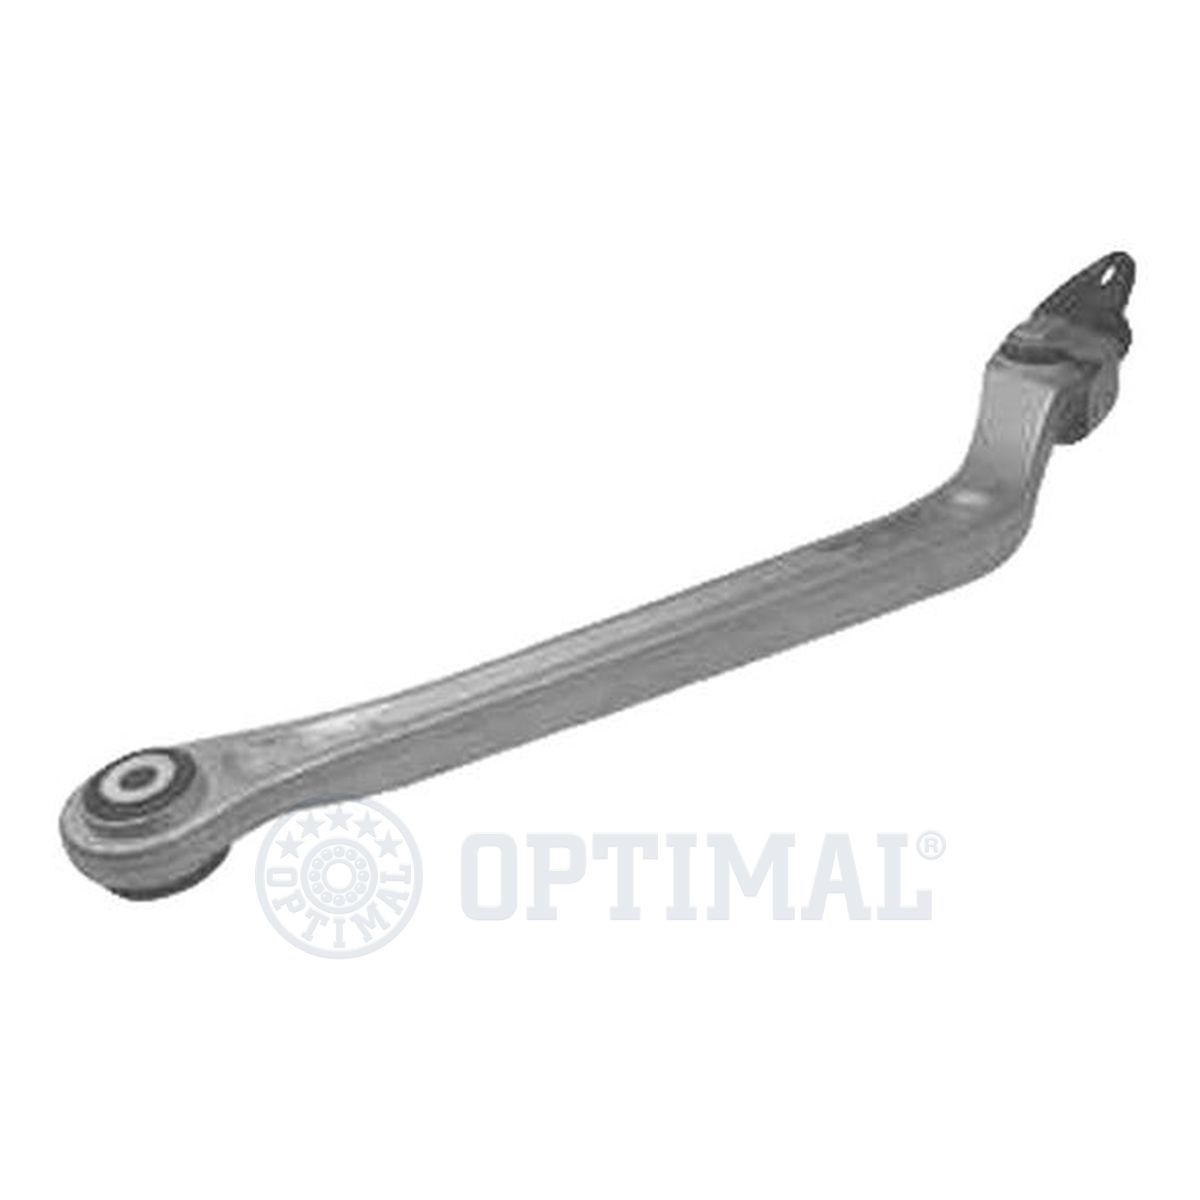 OPTIMAL G5-745 Suspension arm Rear Axle, Rear, Right, Lower, Trailing Arm